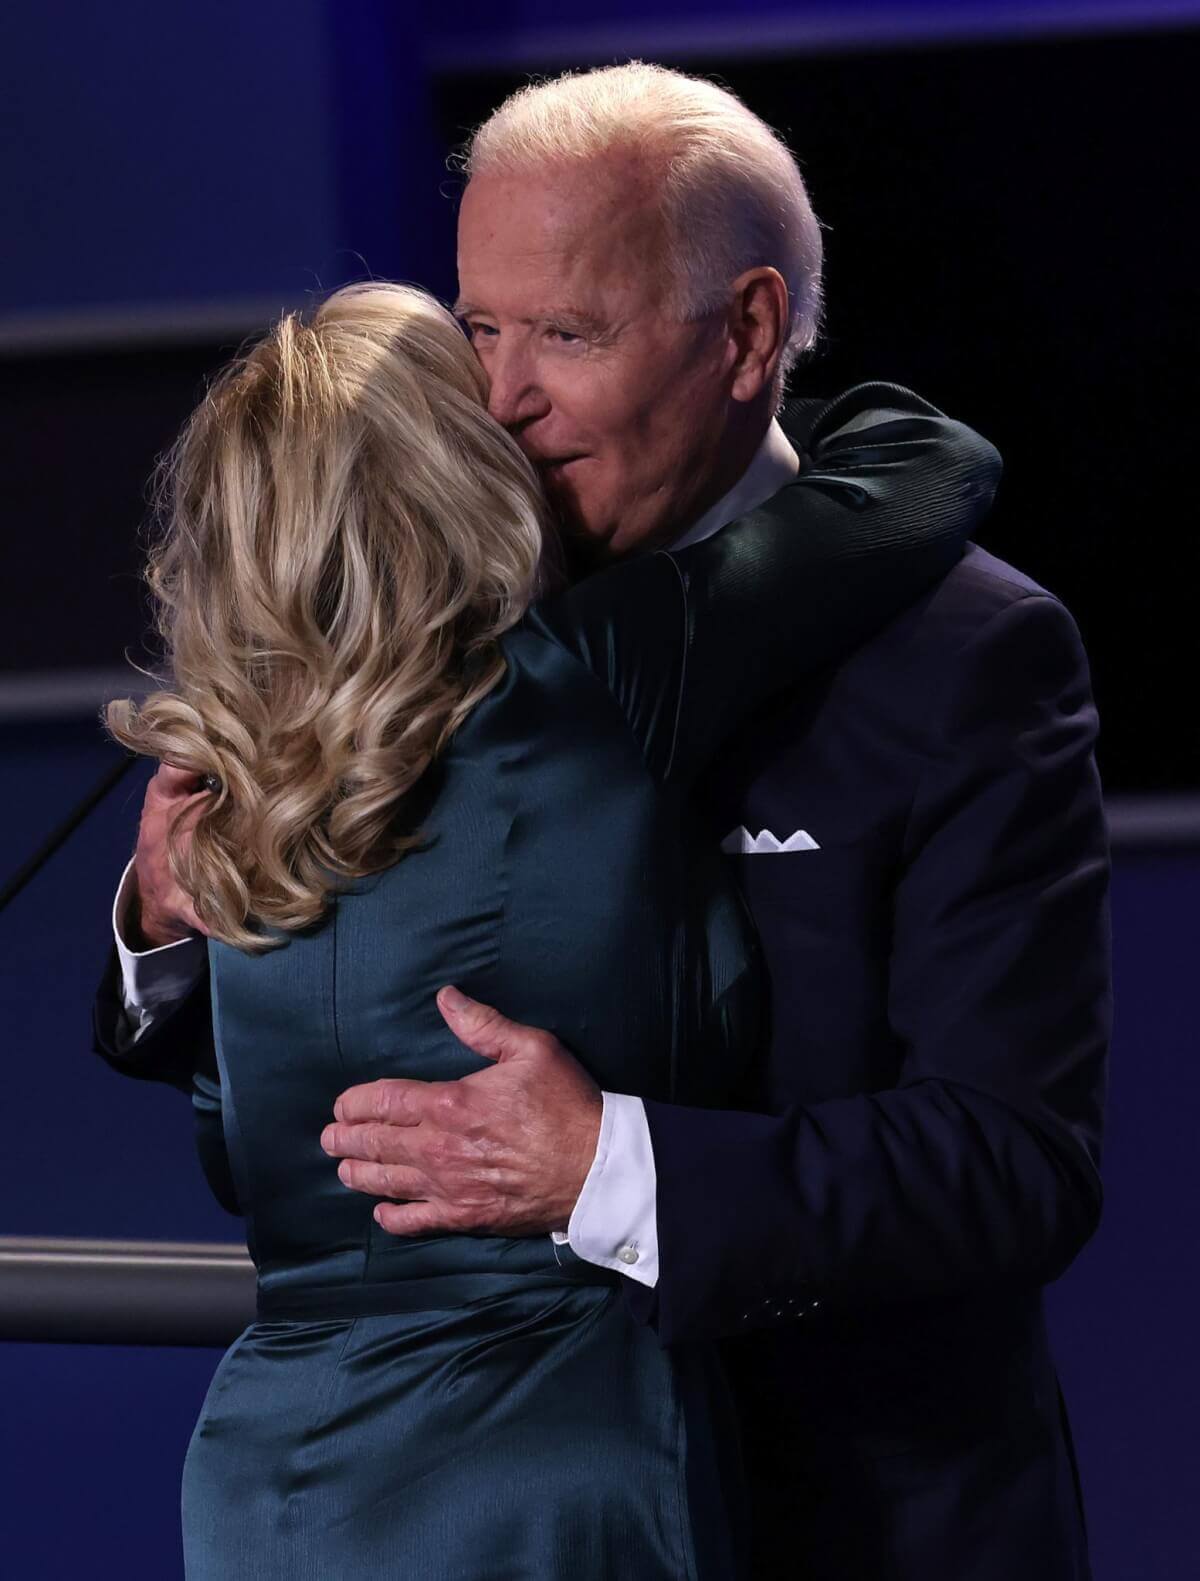 Joe Biden with his wife on debate stage with Trump